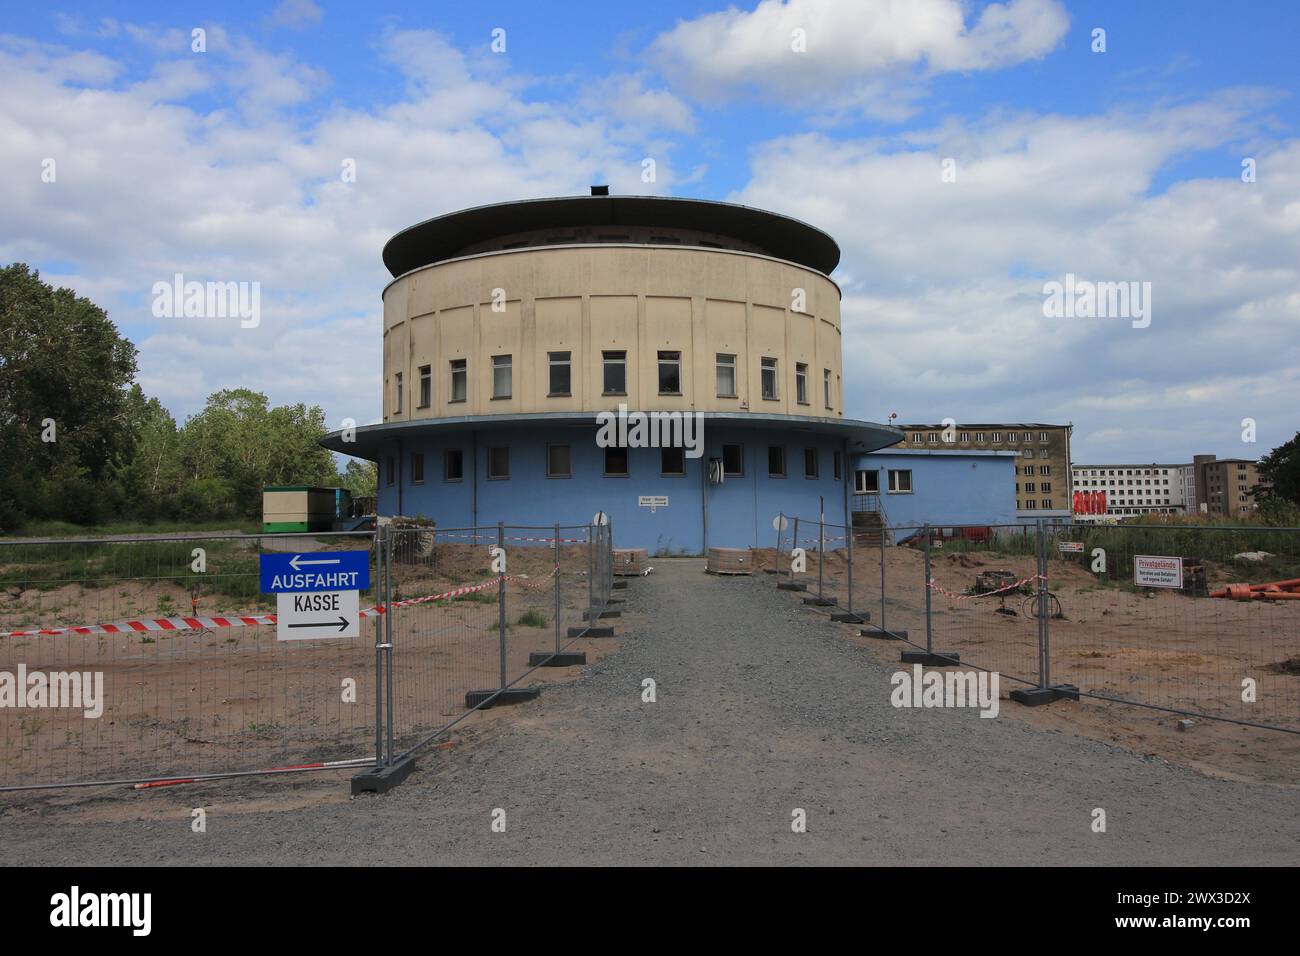 Prora, Germany August 4, 2017: Prora was built by Nazi Germany as a beach resort on the island of Ruegen, Germany, which is known for its colossal Naz Stock Photo